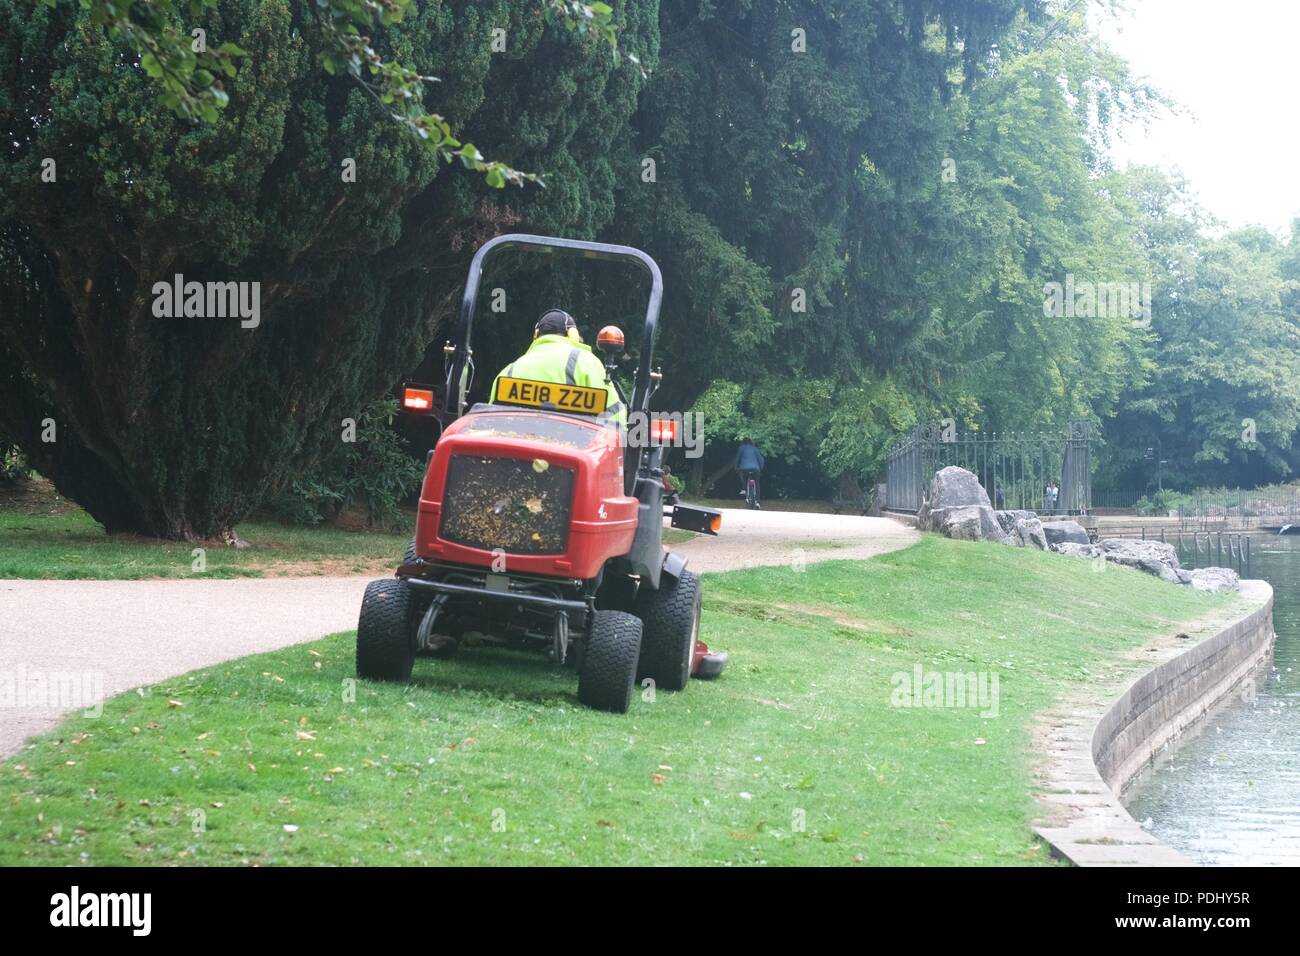 A park worker cuts the grass in pavilion gardens using an industrial mower Stock Photo